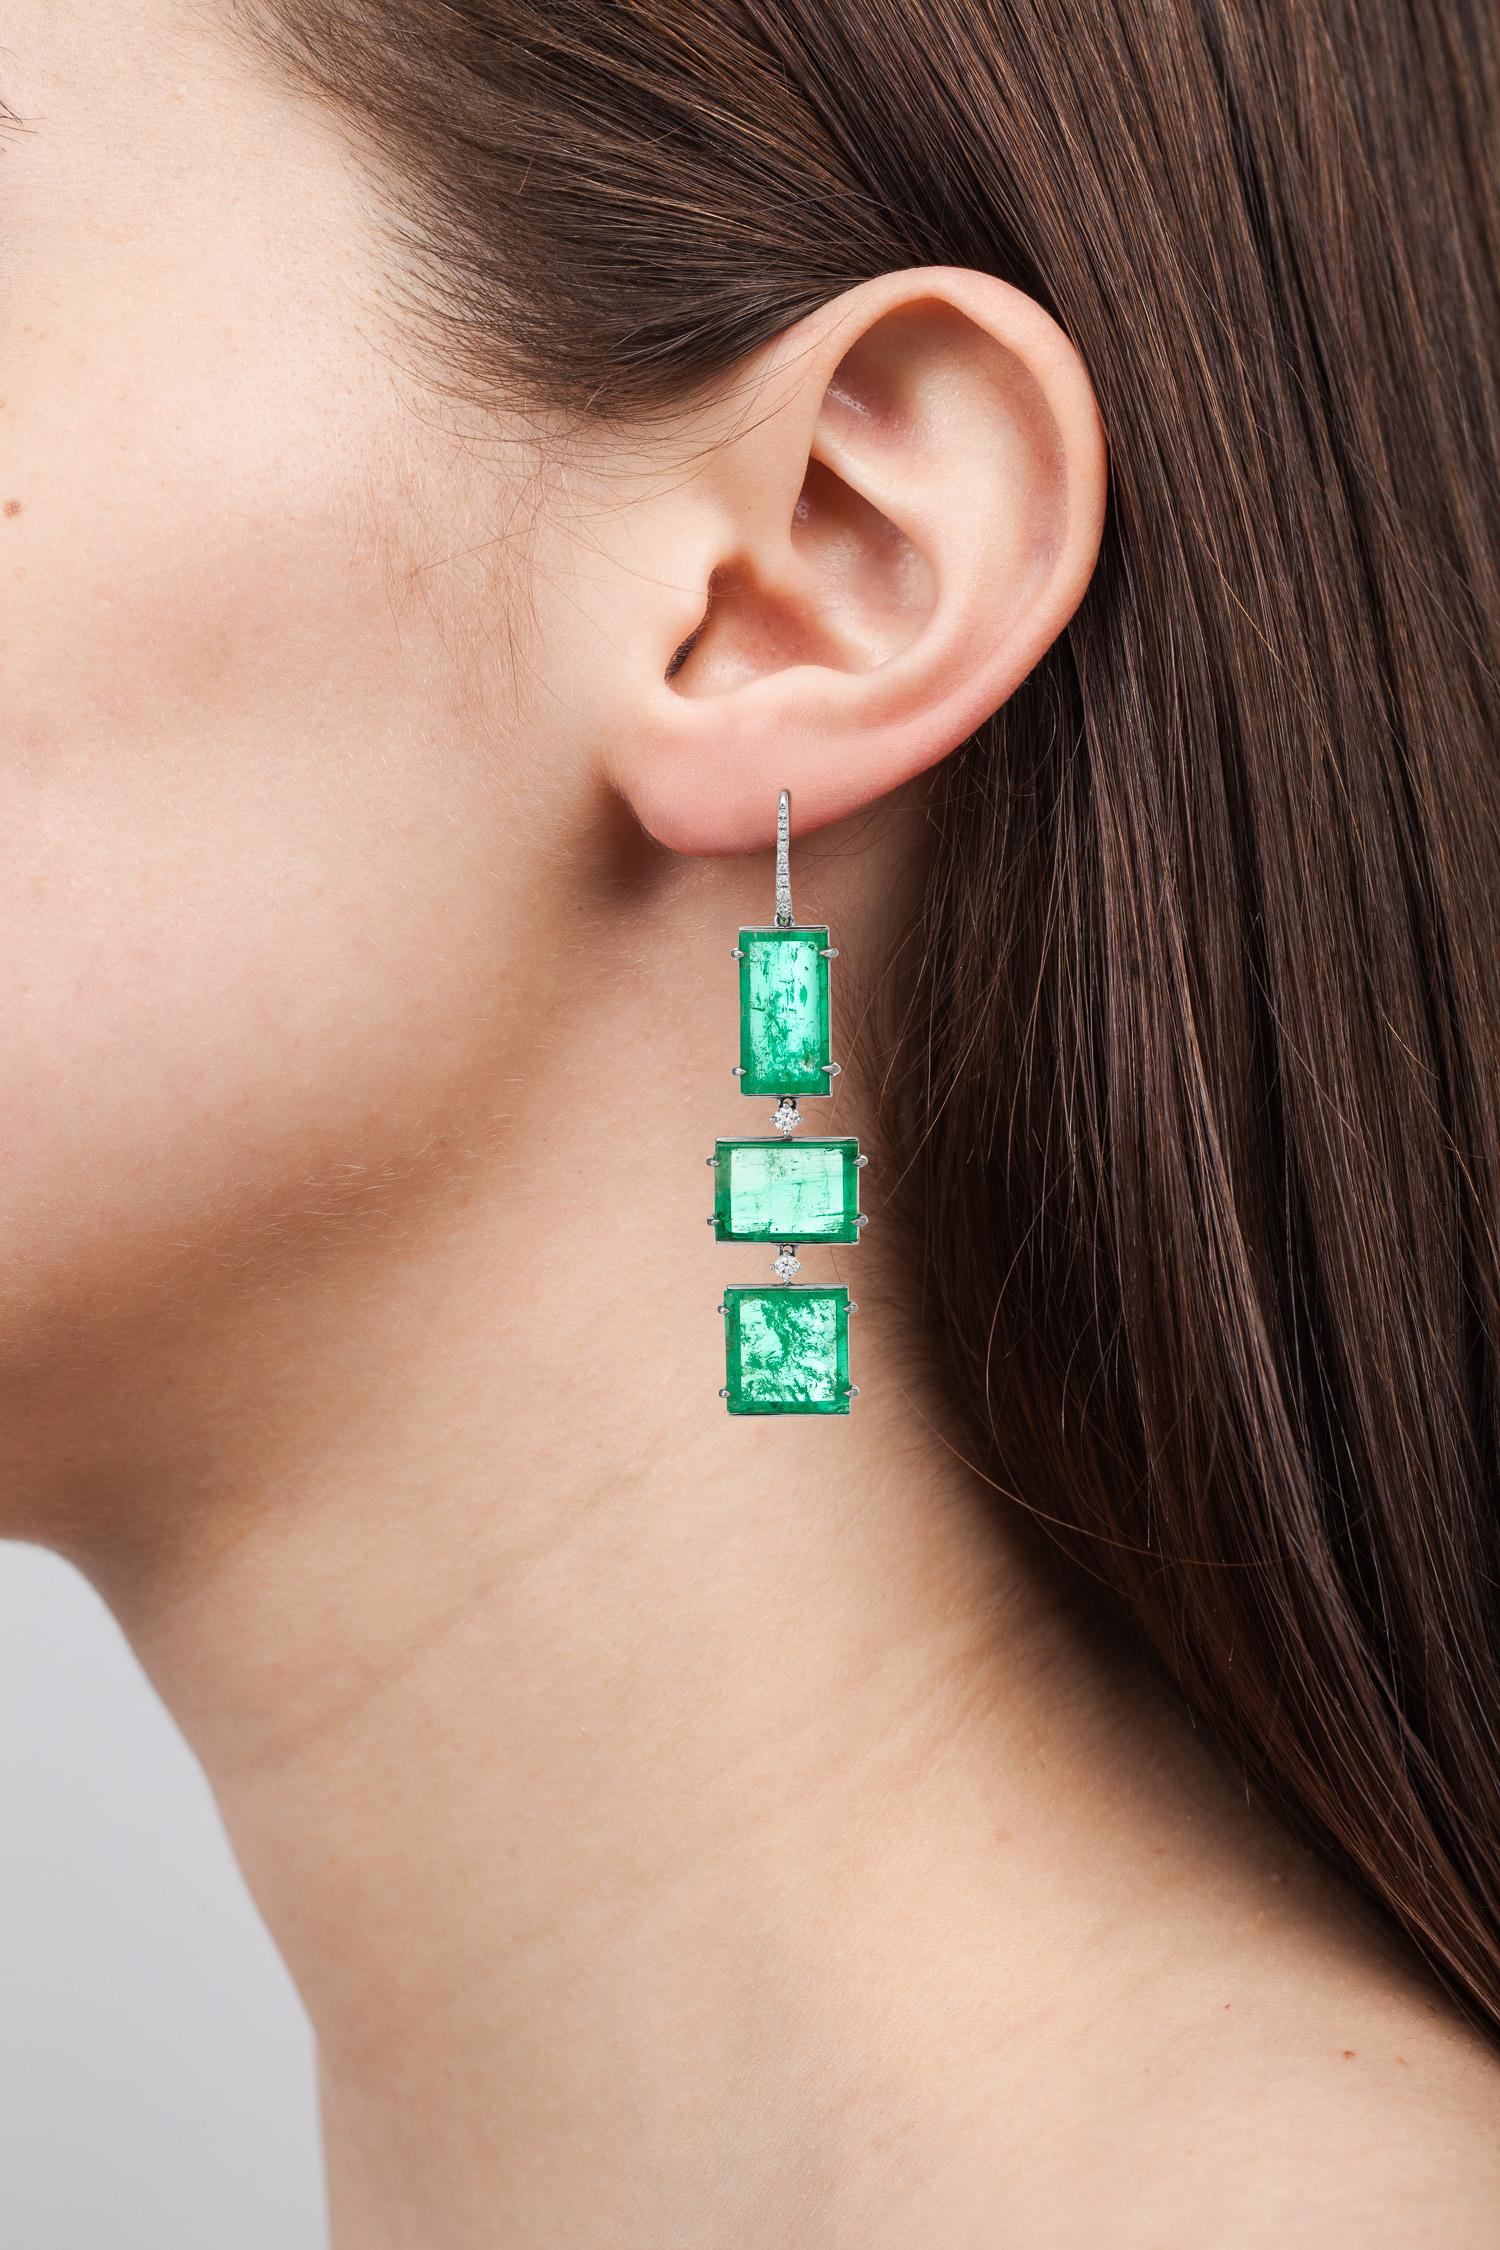 One of a kind Art Deco Style drop earrings featuring 34.86 carats of Muzo Colombian emeralds and diamonds weighing 0.37 carats.

Muzo Emerald Colombia Heritage Atocha Earrings set with 34.86 carats Emerald.

Atocha is inspired by a collection of